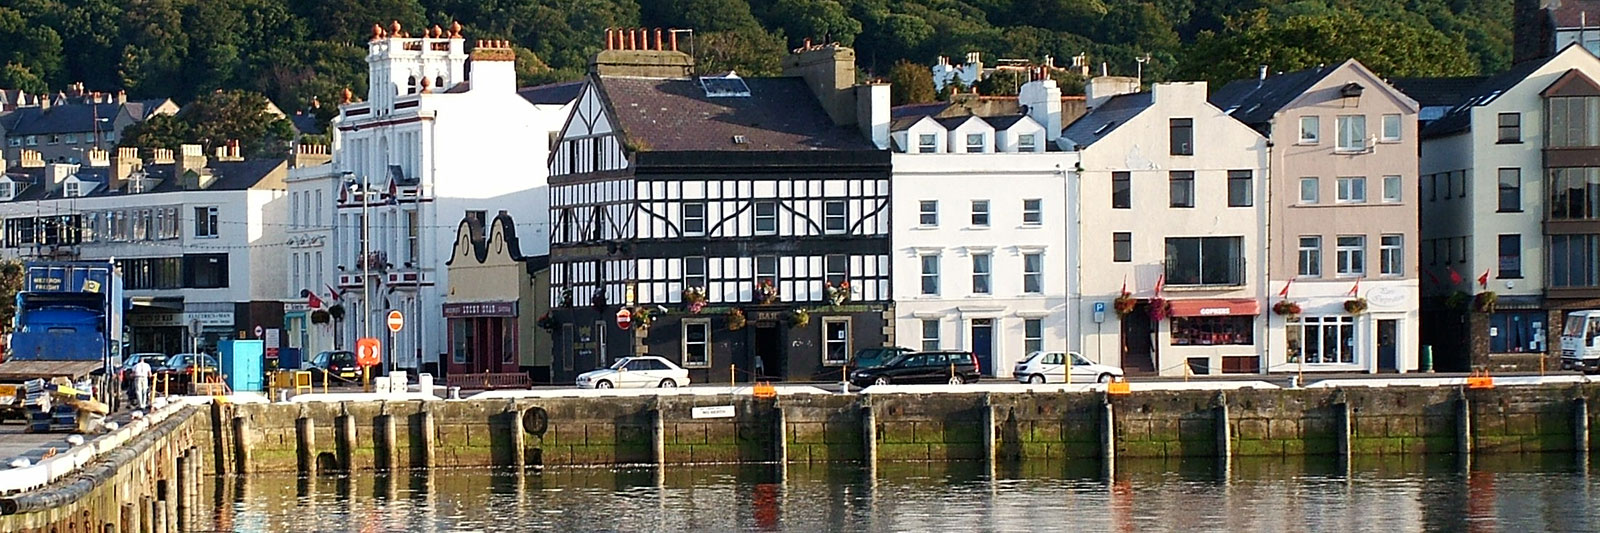 Panoramic view of Ramsey harbour with the shops and view of St Pauls Square